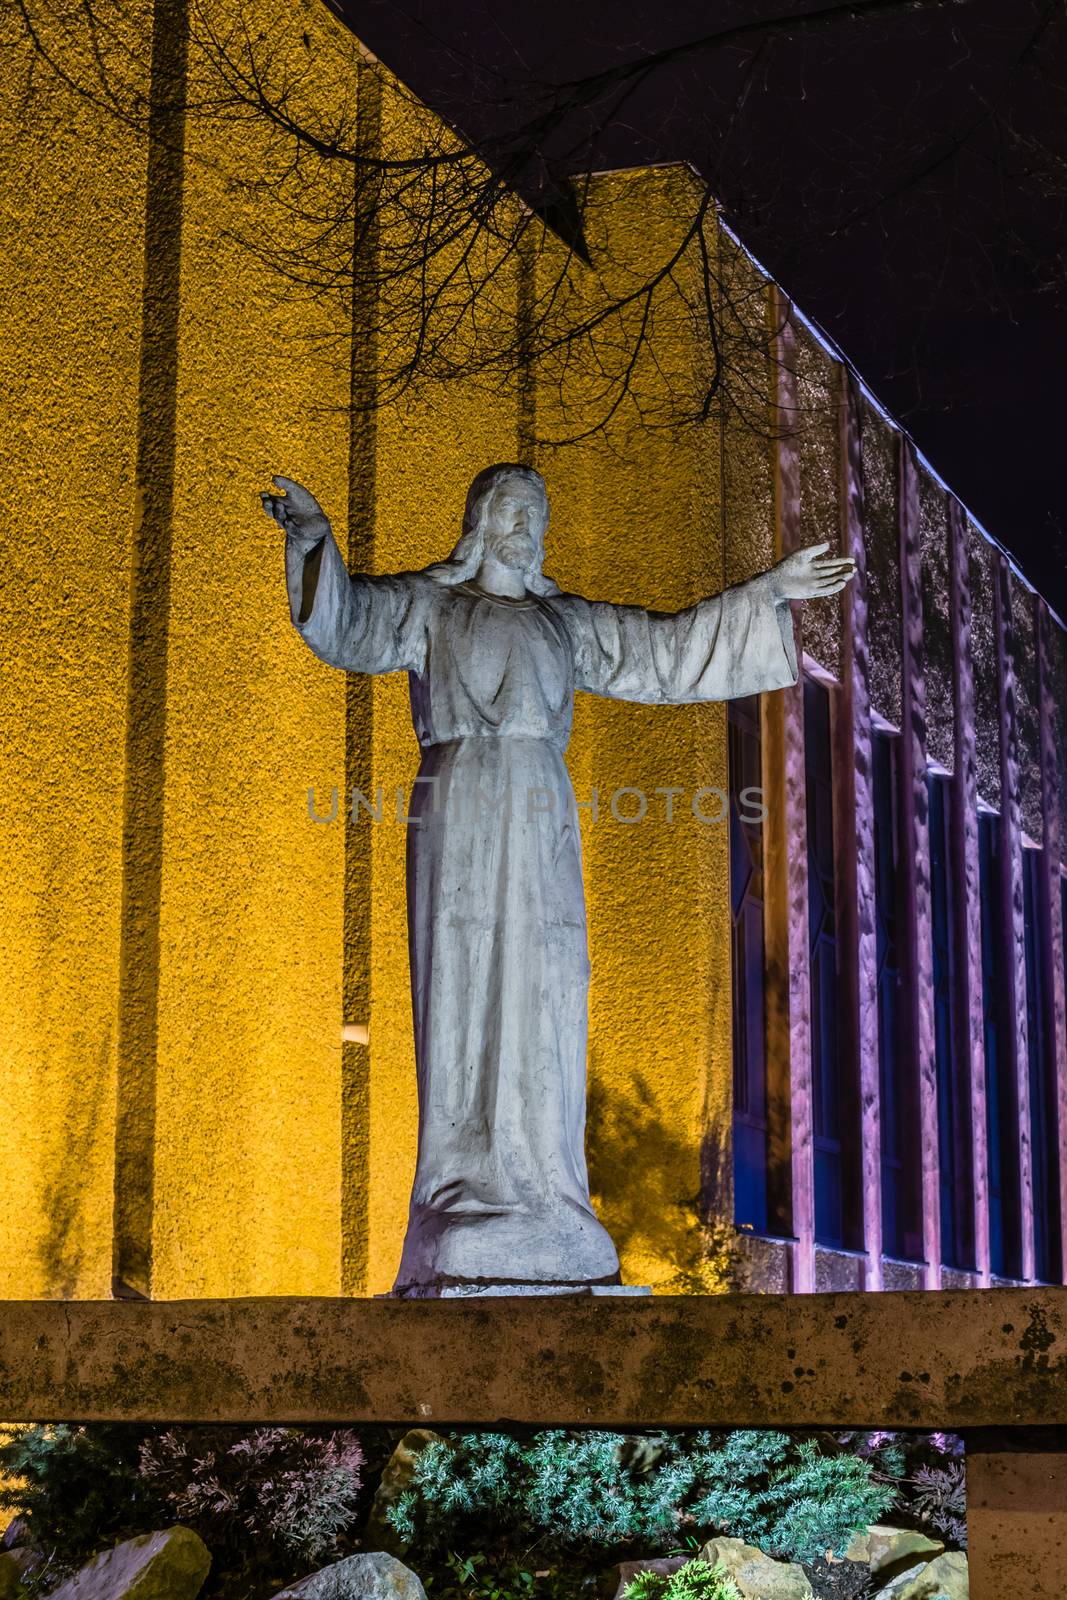 Night view of Jesus Christ statue in fornt of the church in Katowice, Poland.